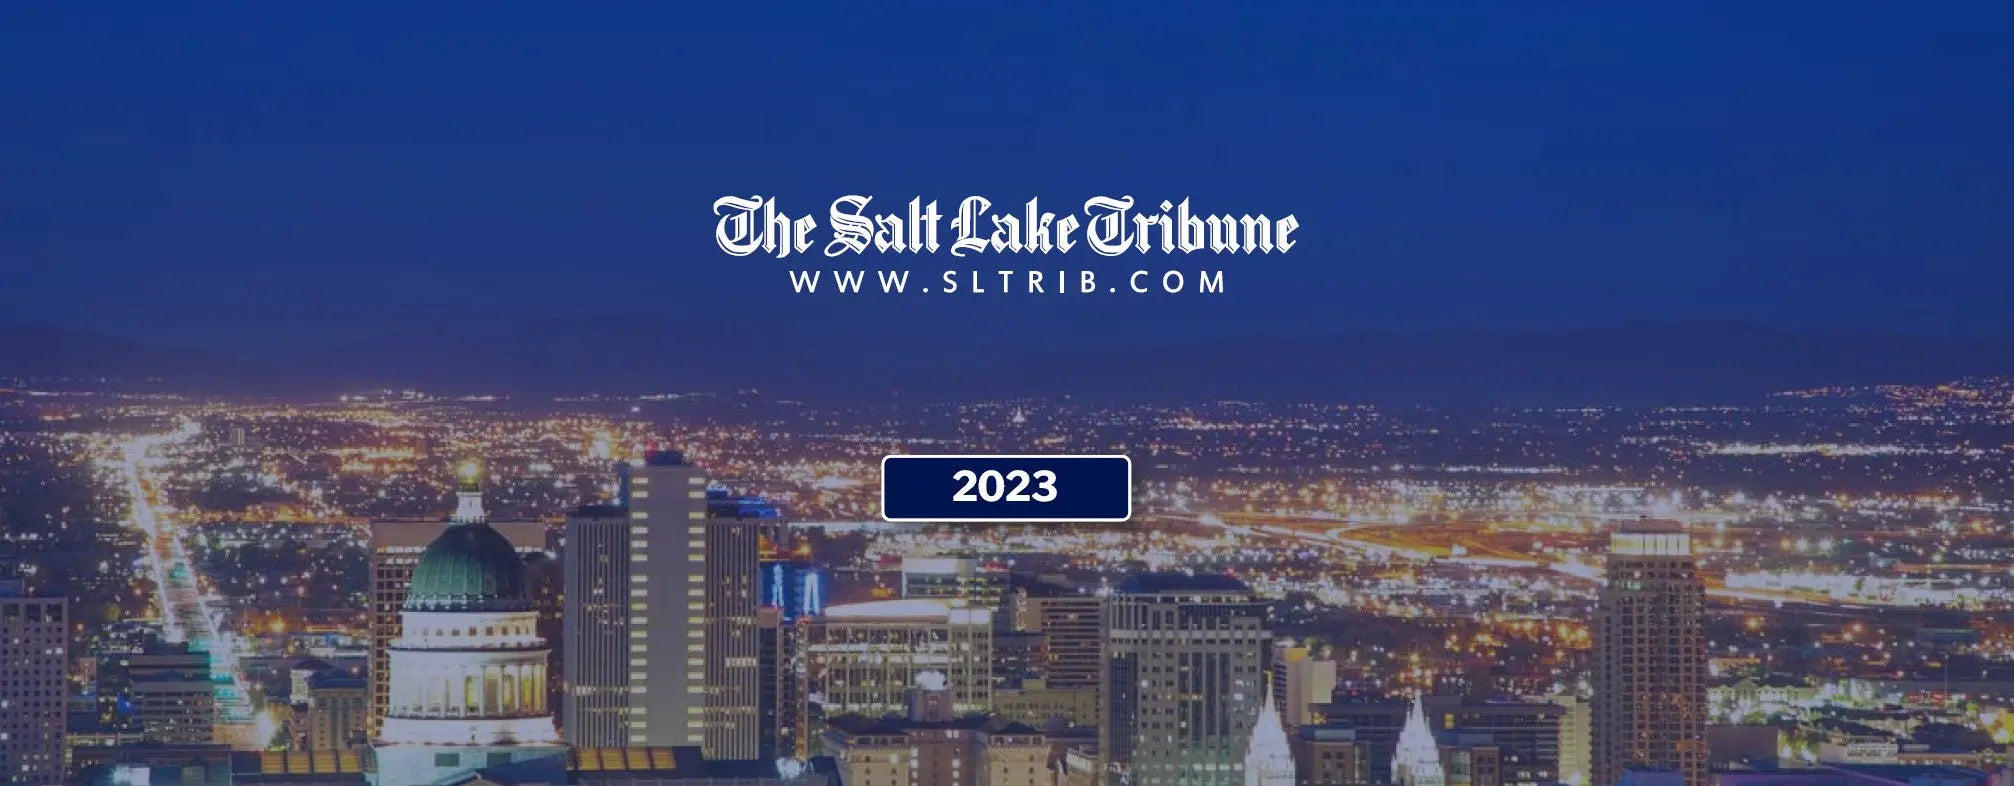 SALT LAKE TRIBUNE NAMES KT TAPE A WINNER OF THE WASATCH FRONT TOP WORKPLACES 2023 AWARD